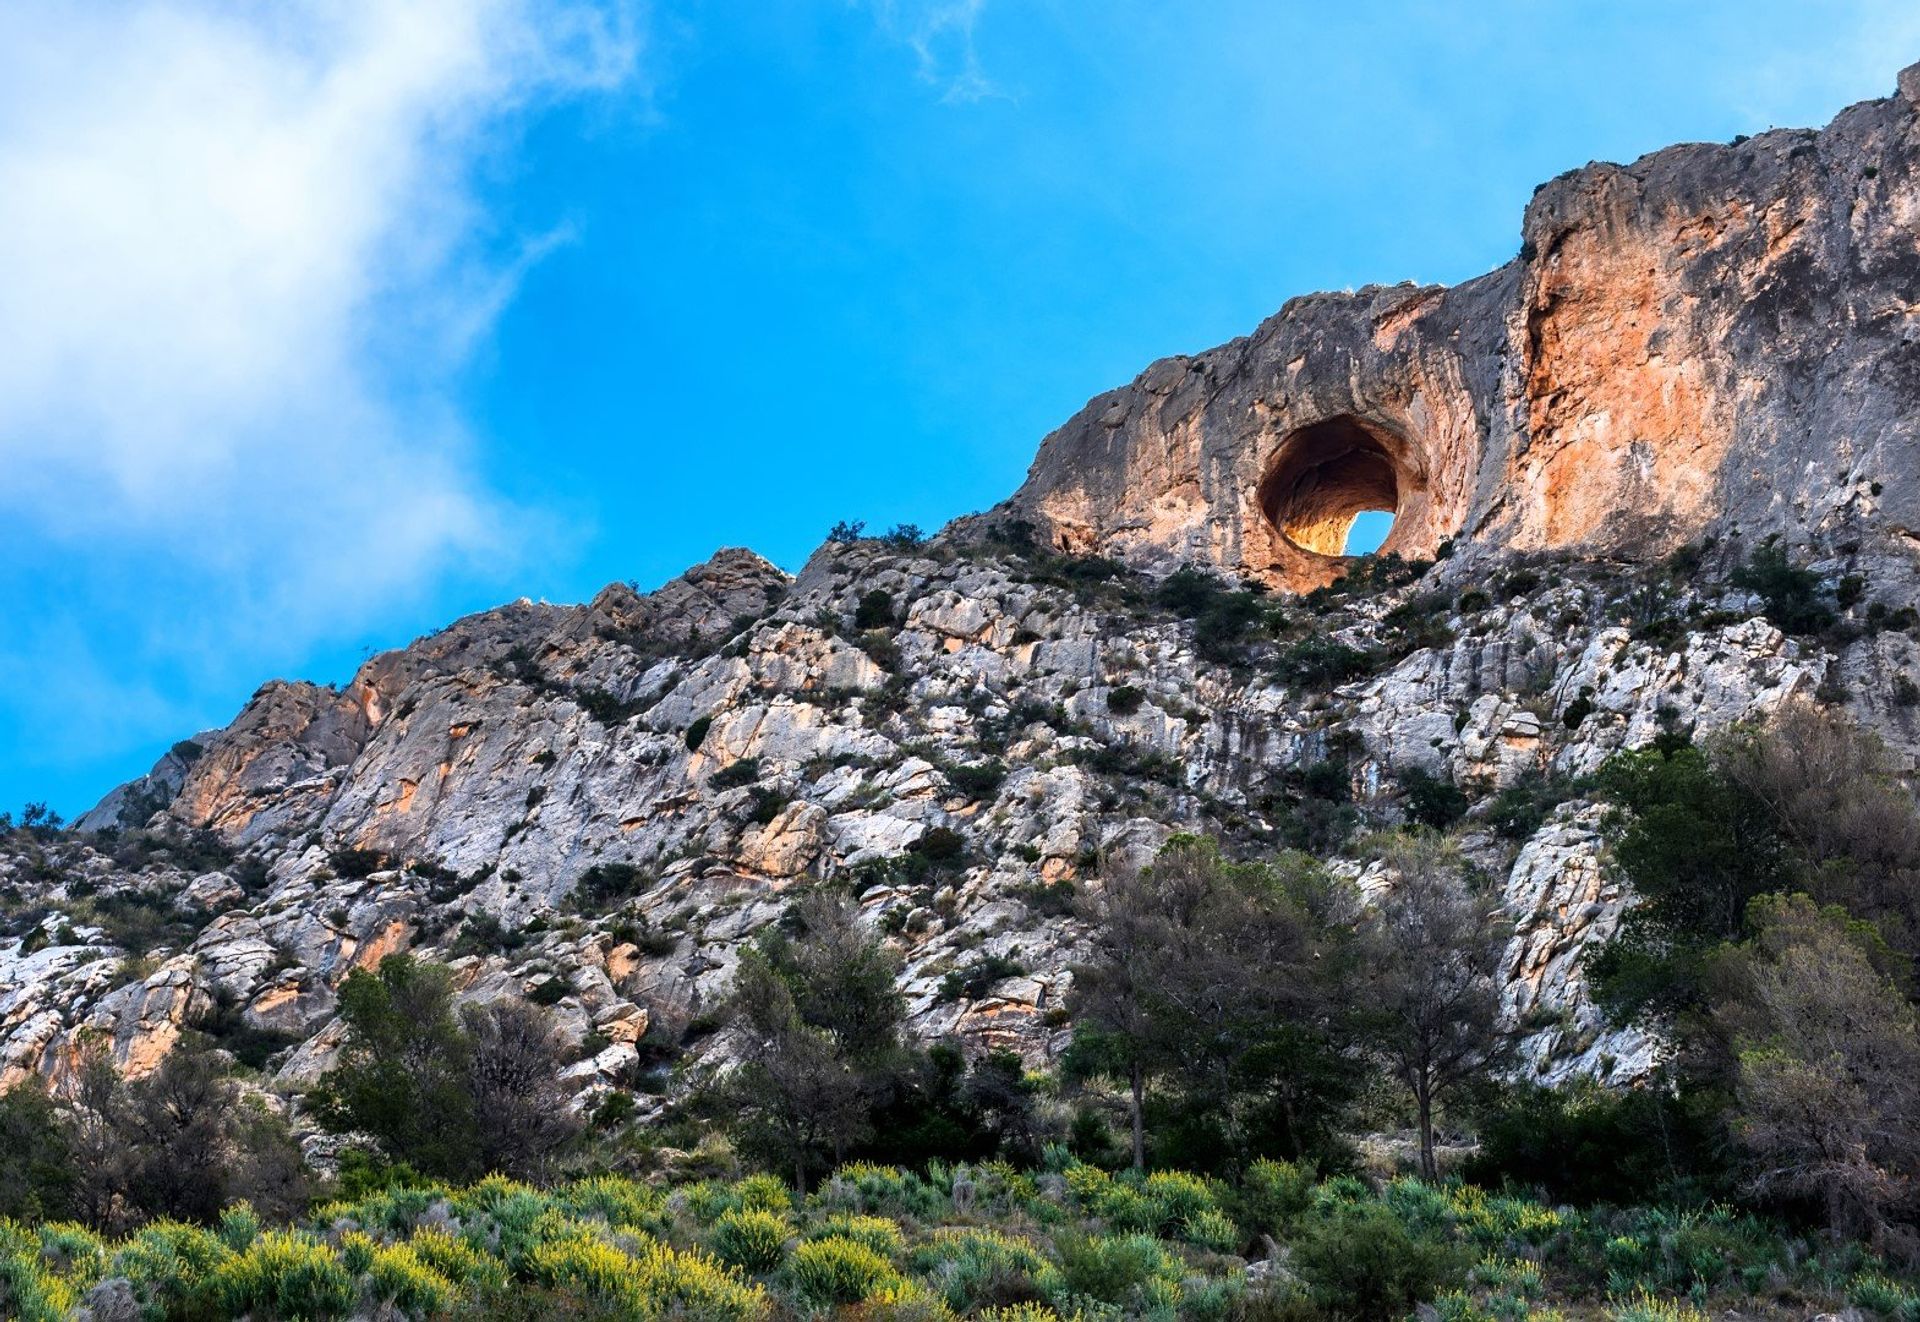 About a 20 minute drive from El Campello, Canelobre caves in Busot are a nature lovers' paradise